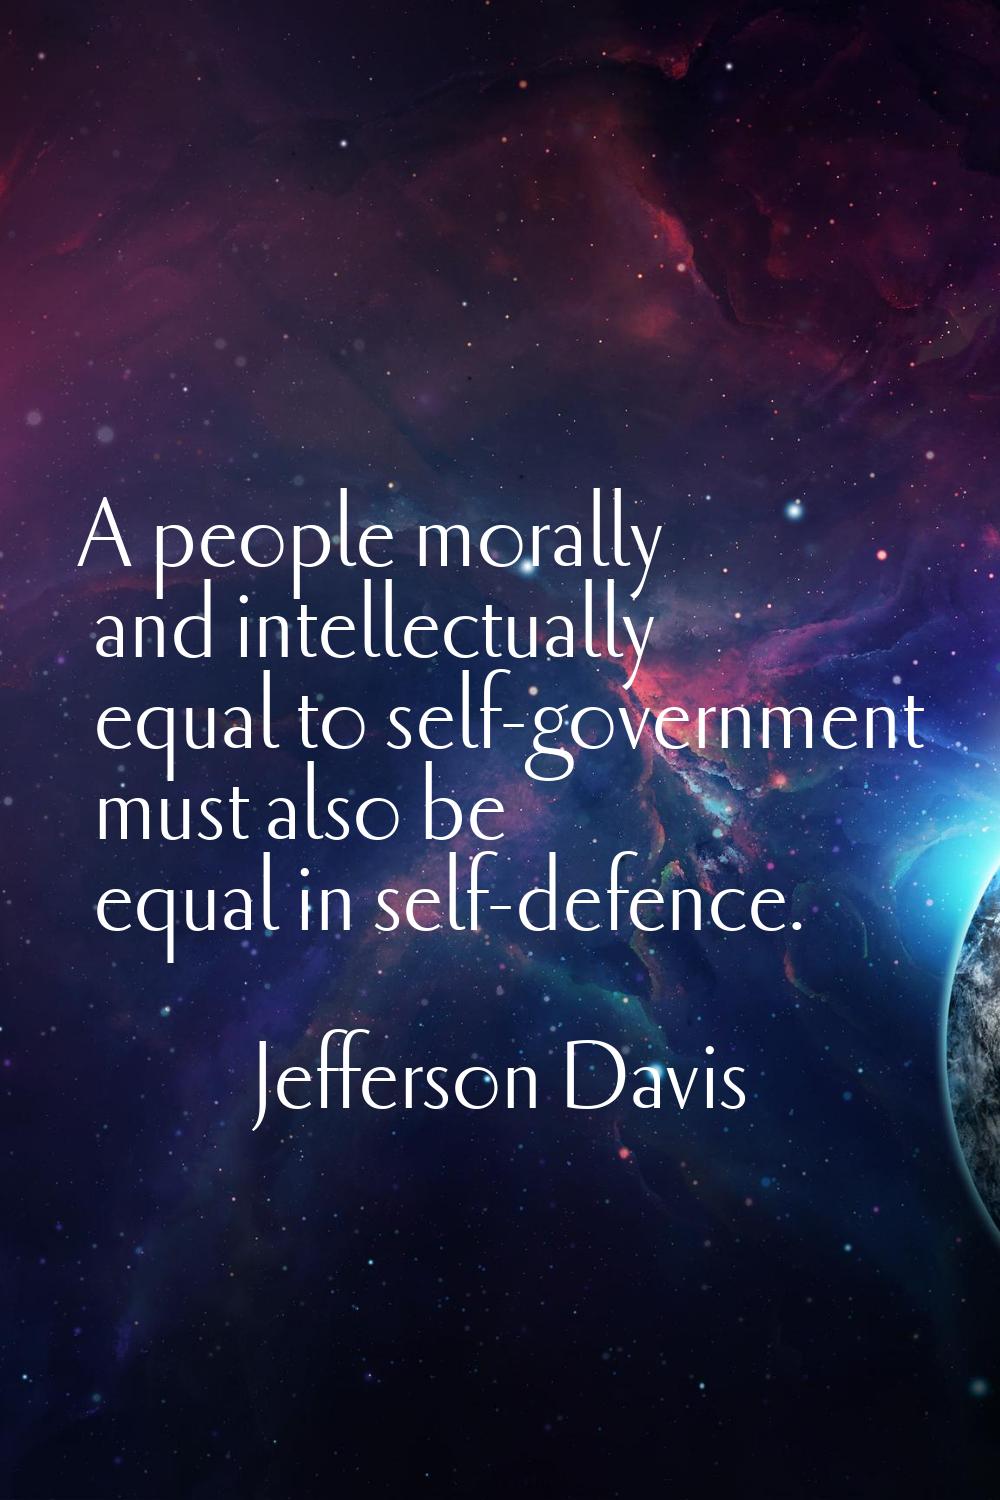 A people morally and intellectually equal to self-government must also be equal in self-defence.